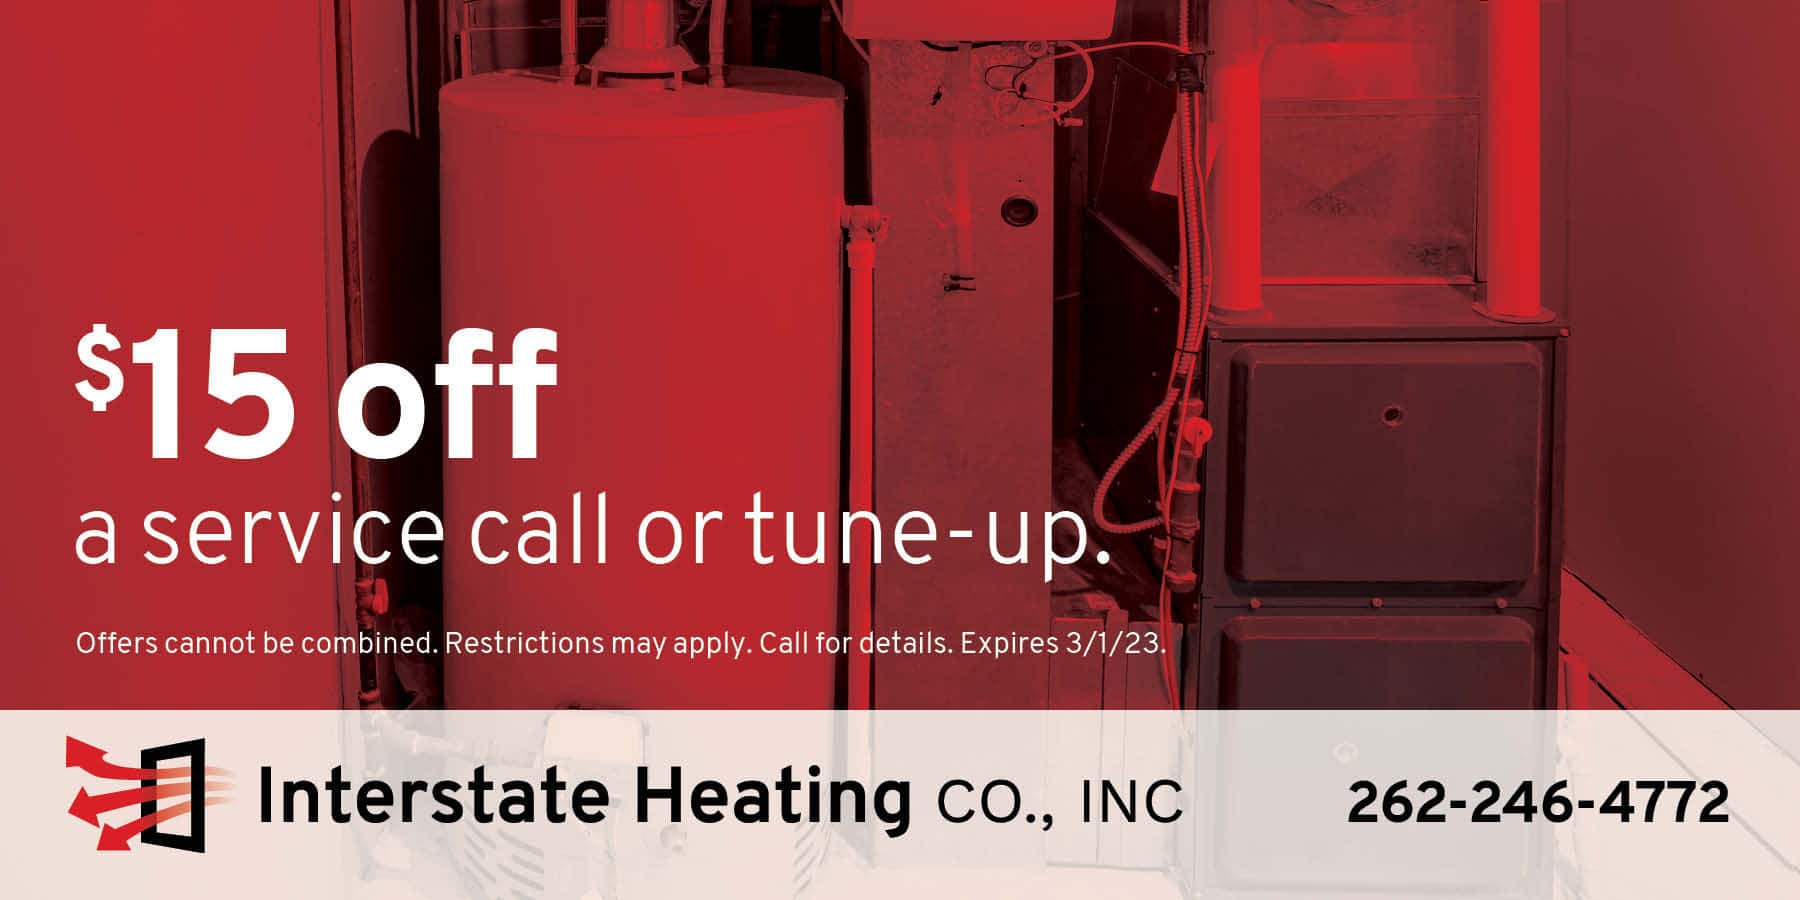 $15 off a service call or tune-up coupon. Interstate Heating Co.